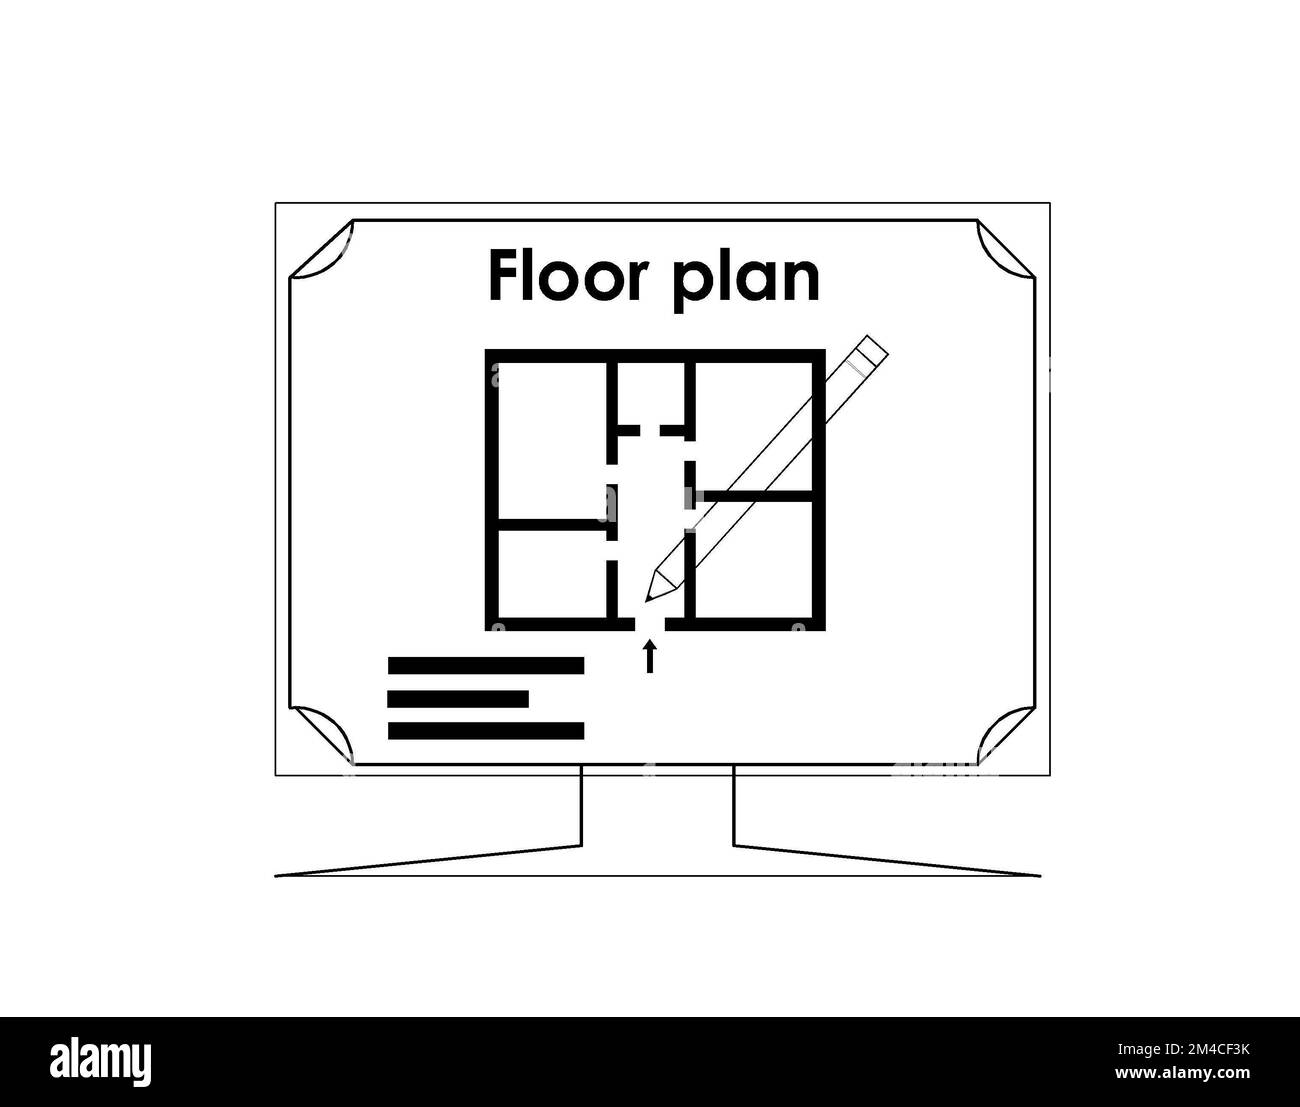 Black and white house floor plan, blueprint. House apartment with furniture. Floor plan of an apartment building. Unusual floor plan. Stock Photo